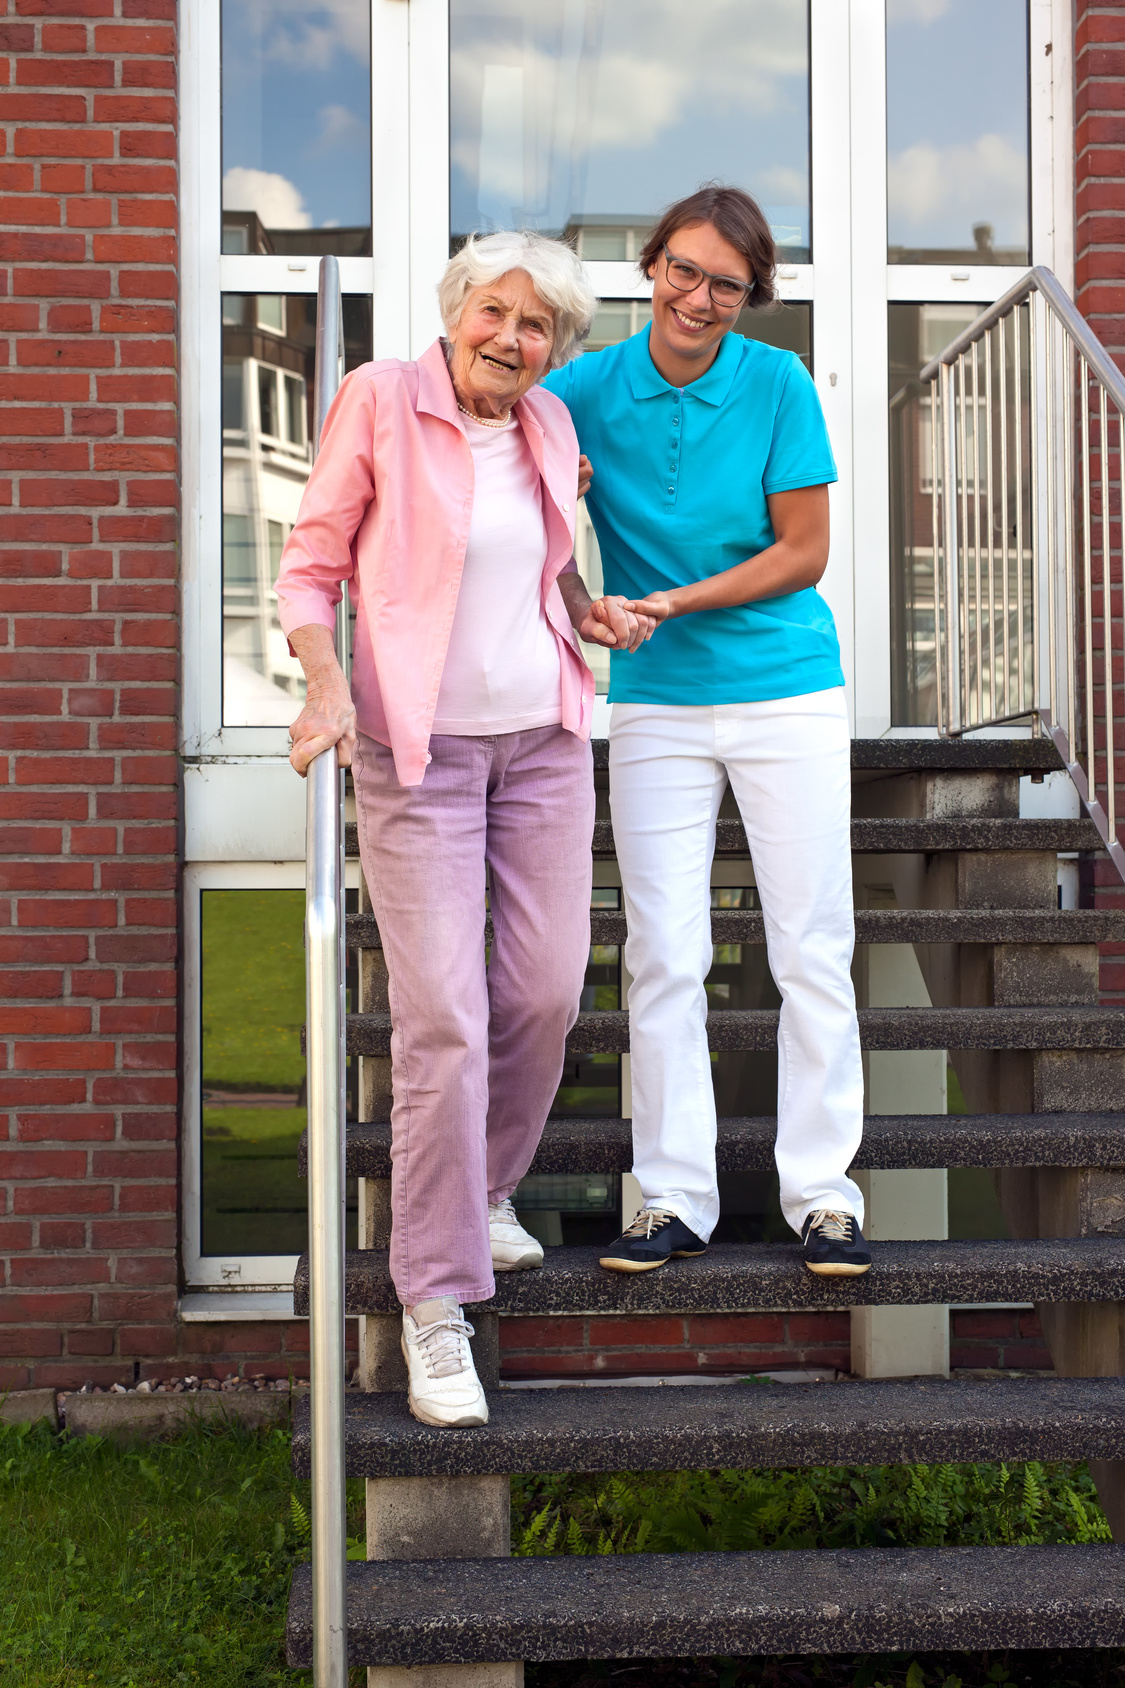 Caregiver-with-Senior-Outside-on-Stairs